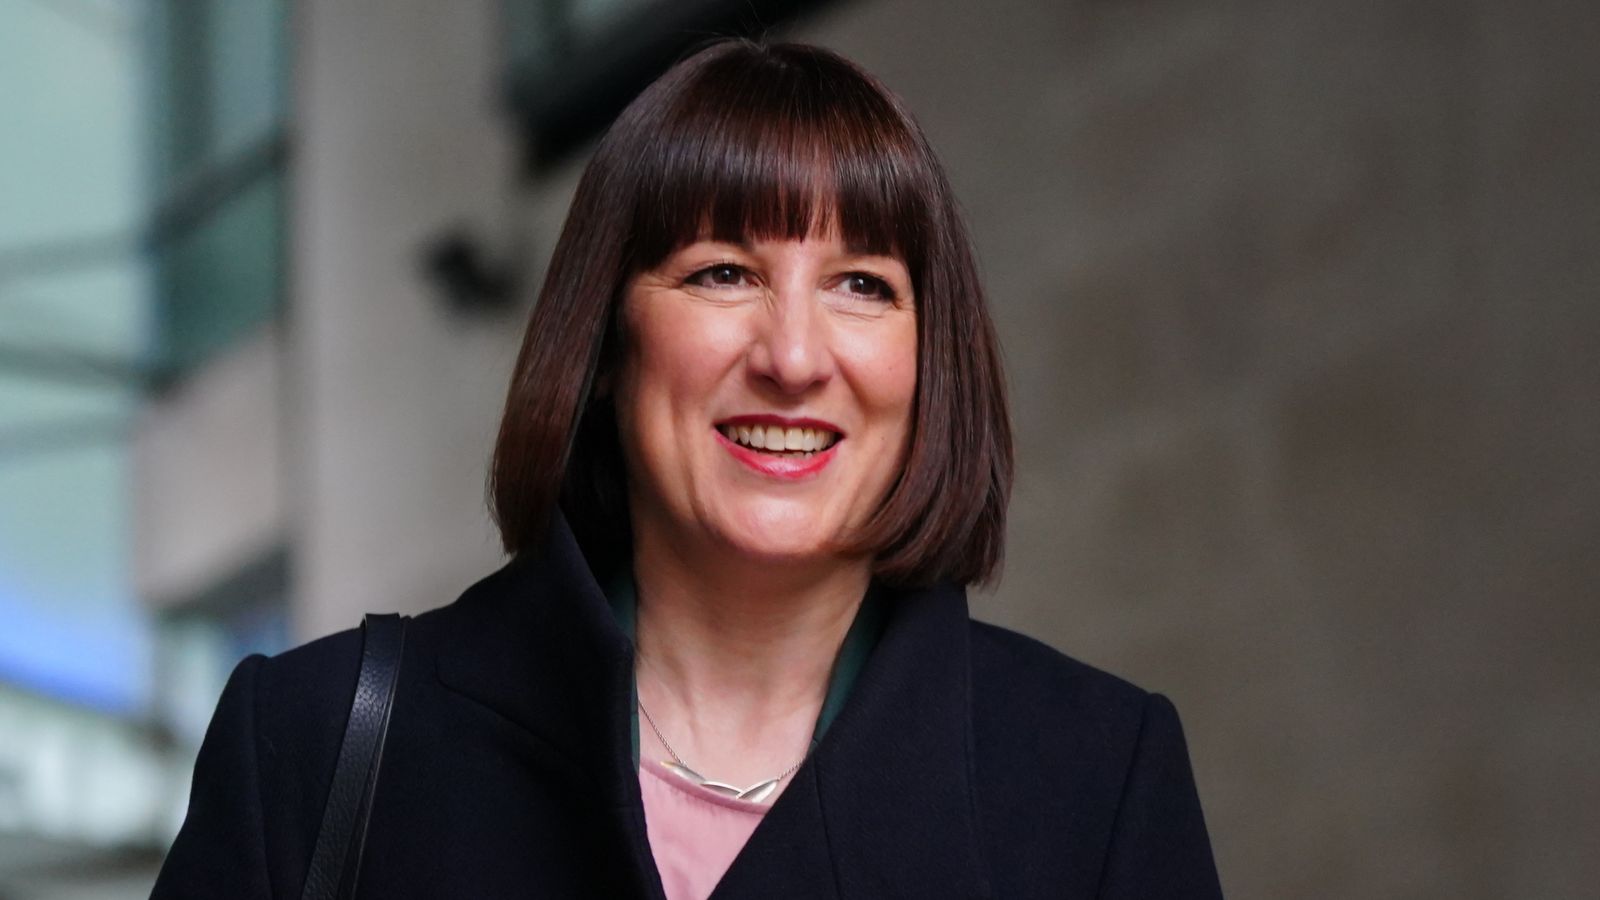 Labour will not bail out bankrupt councils, Rachel Reeves says